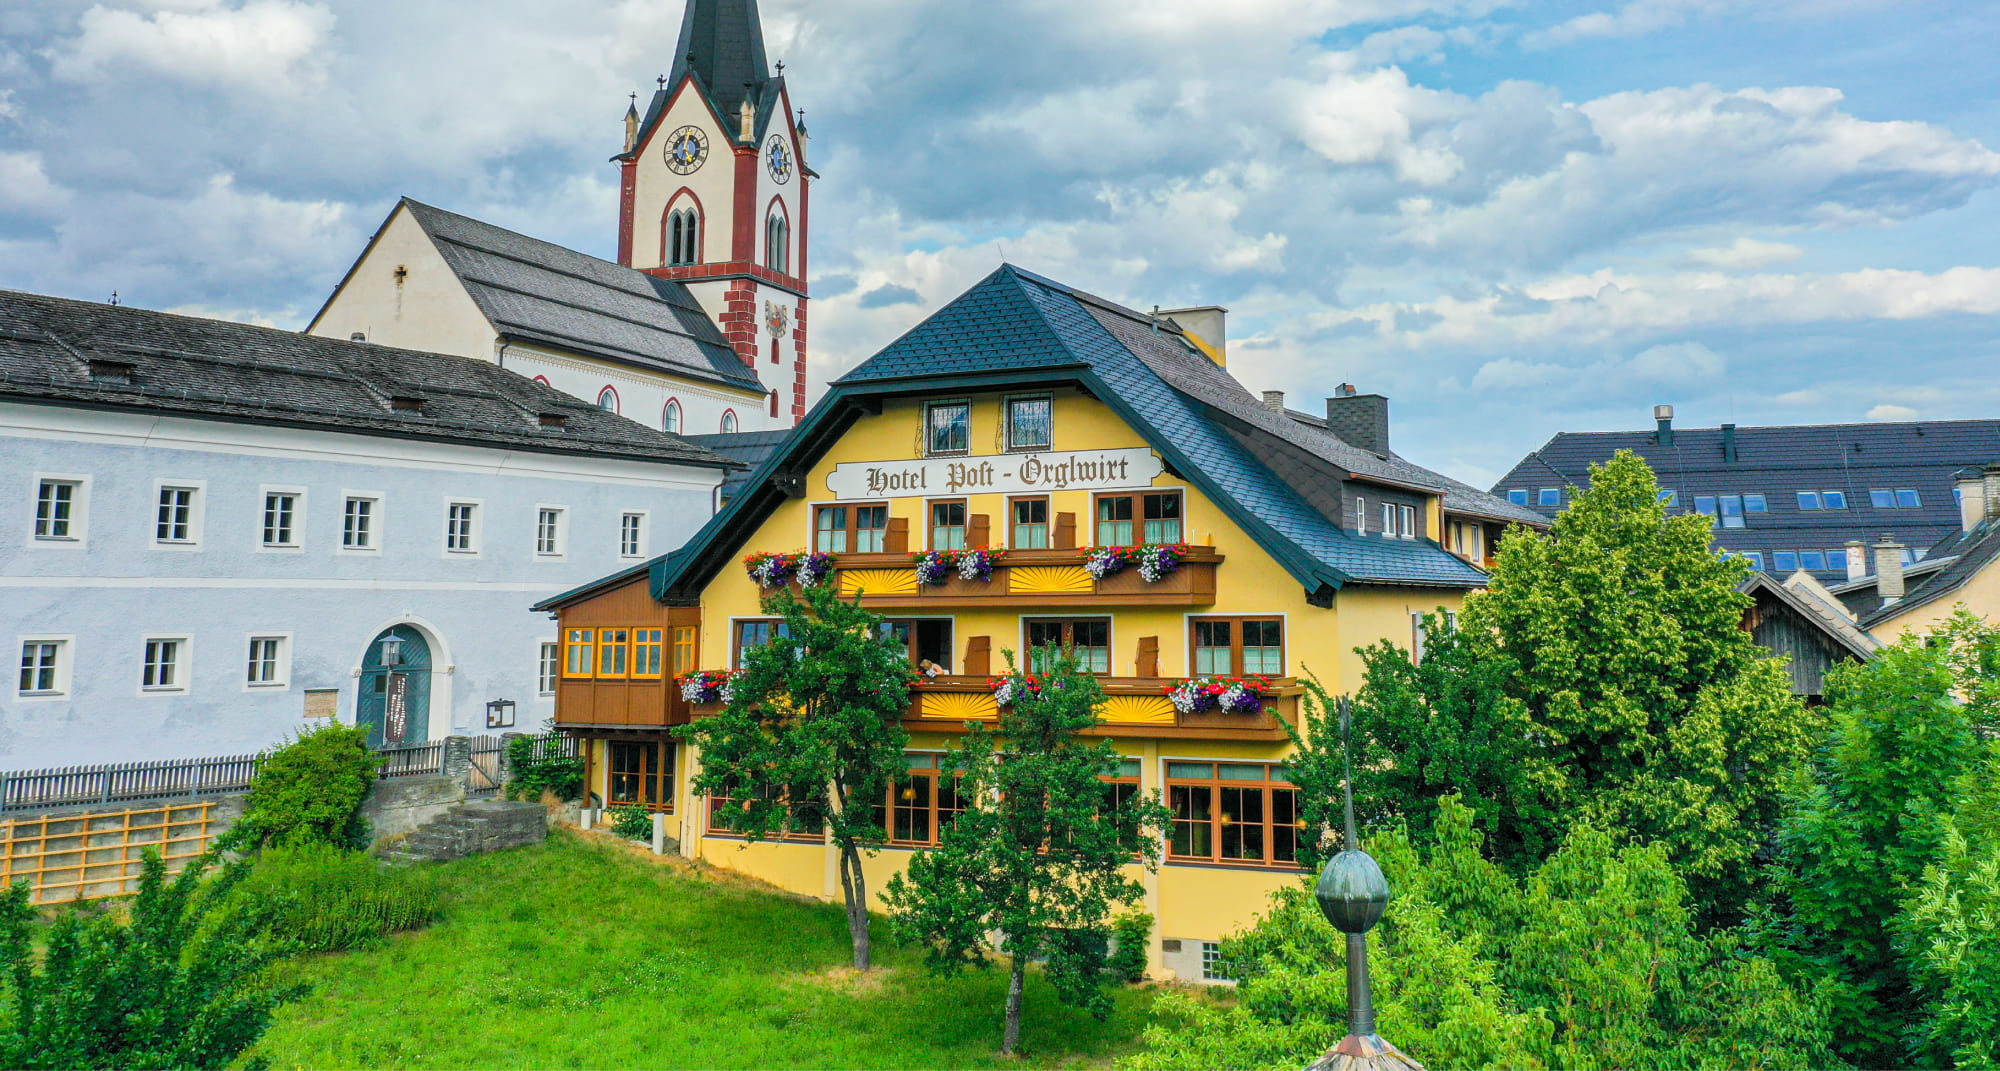 Exterior shot of the Hotel Post Örglwirt with the Mariapfarr pilgrimage basilica in the background